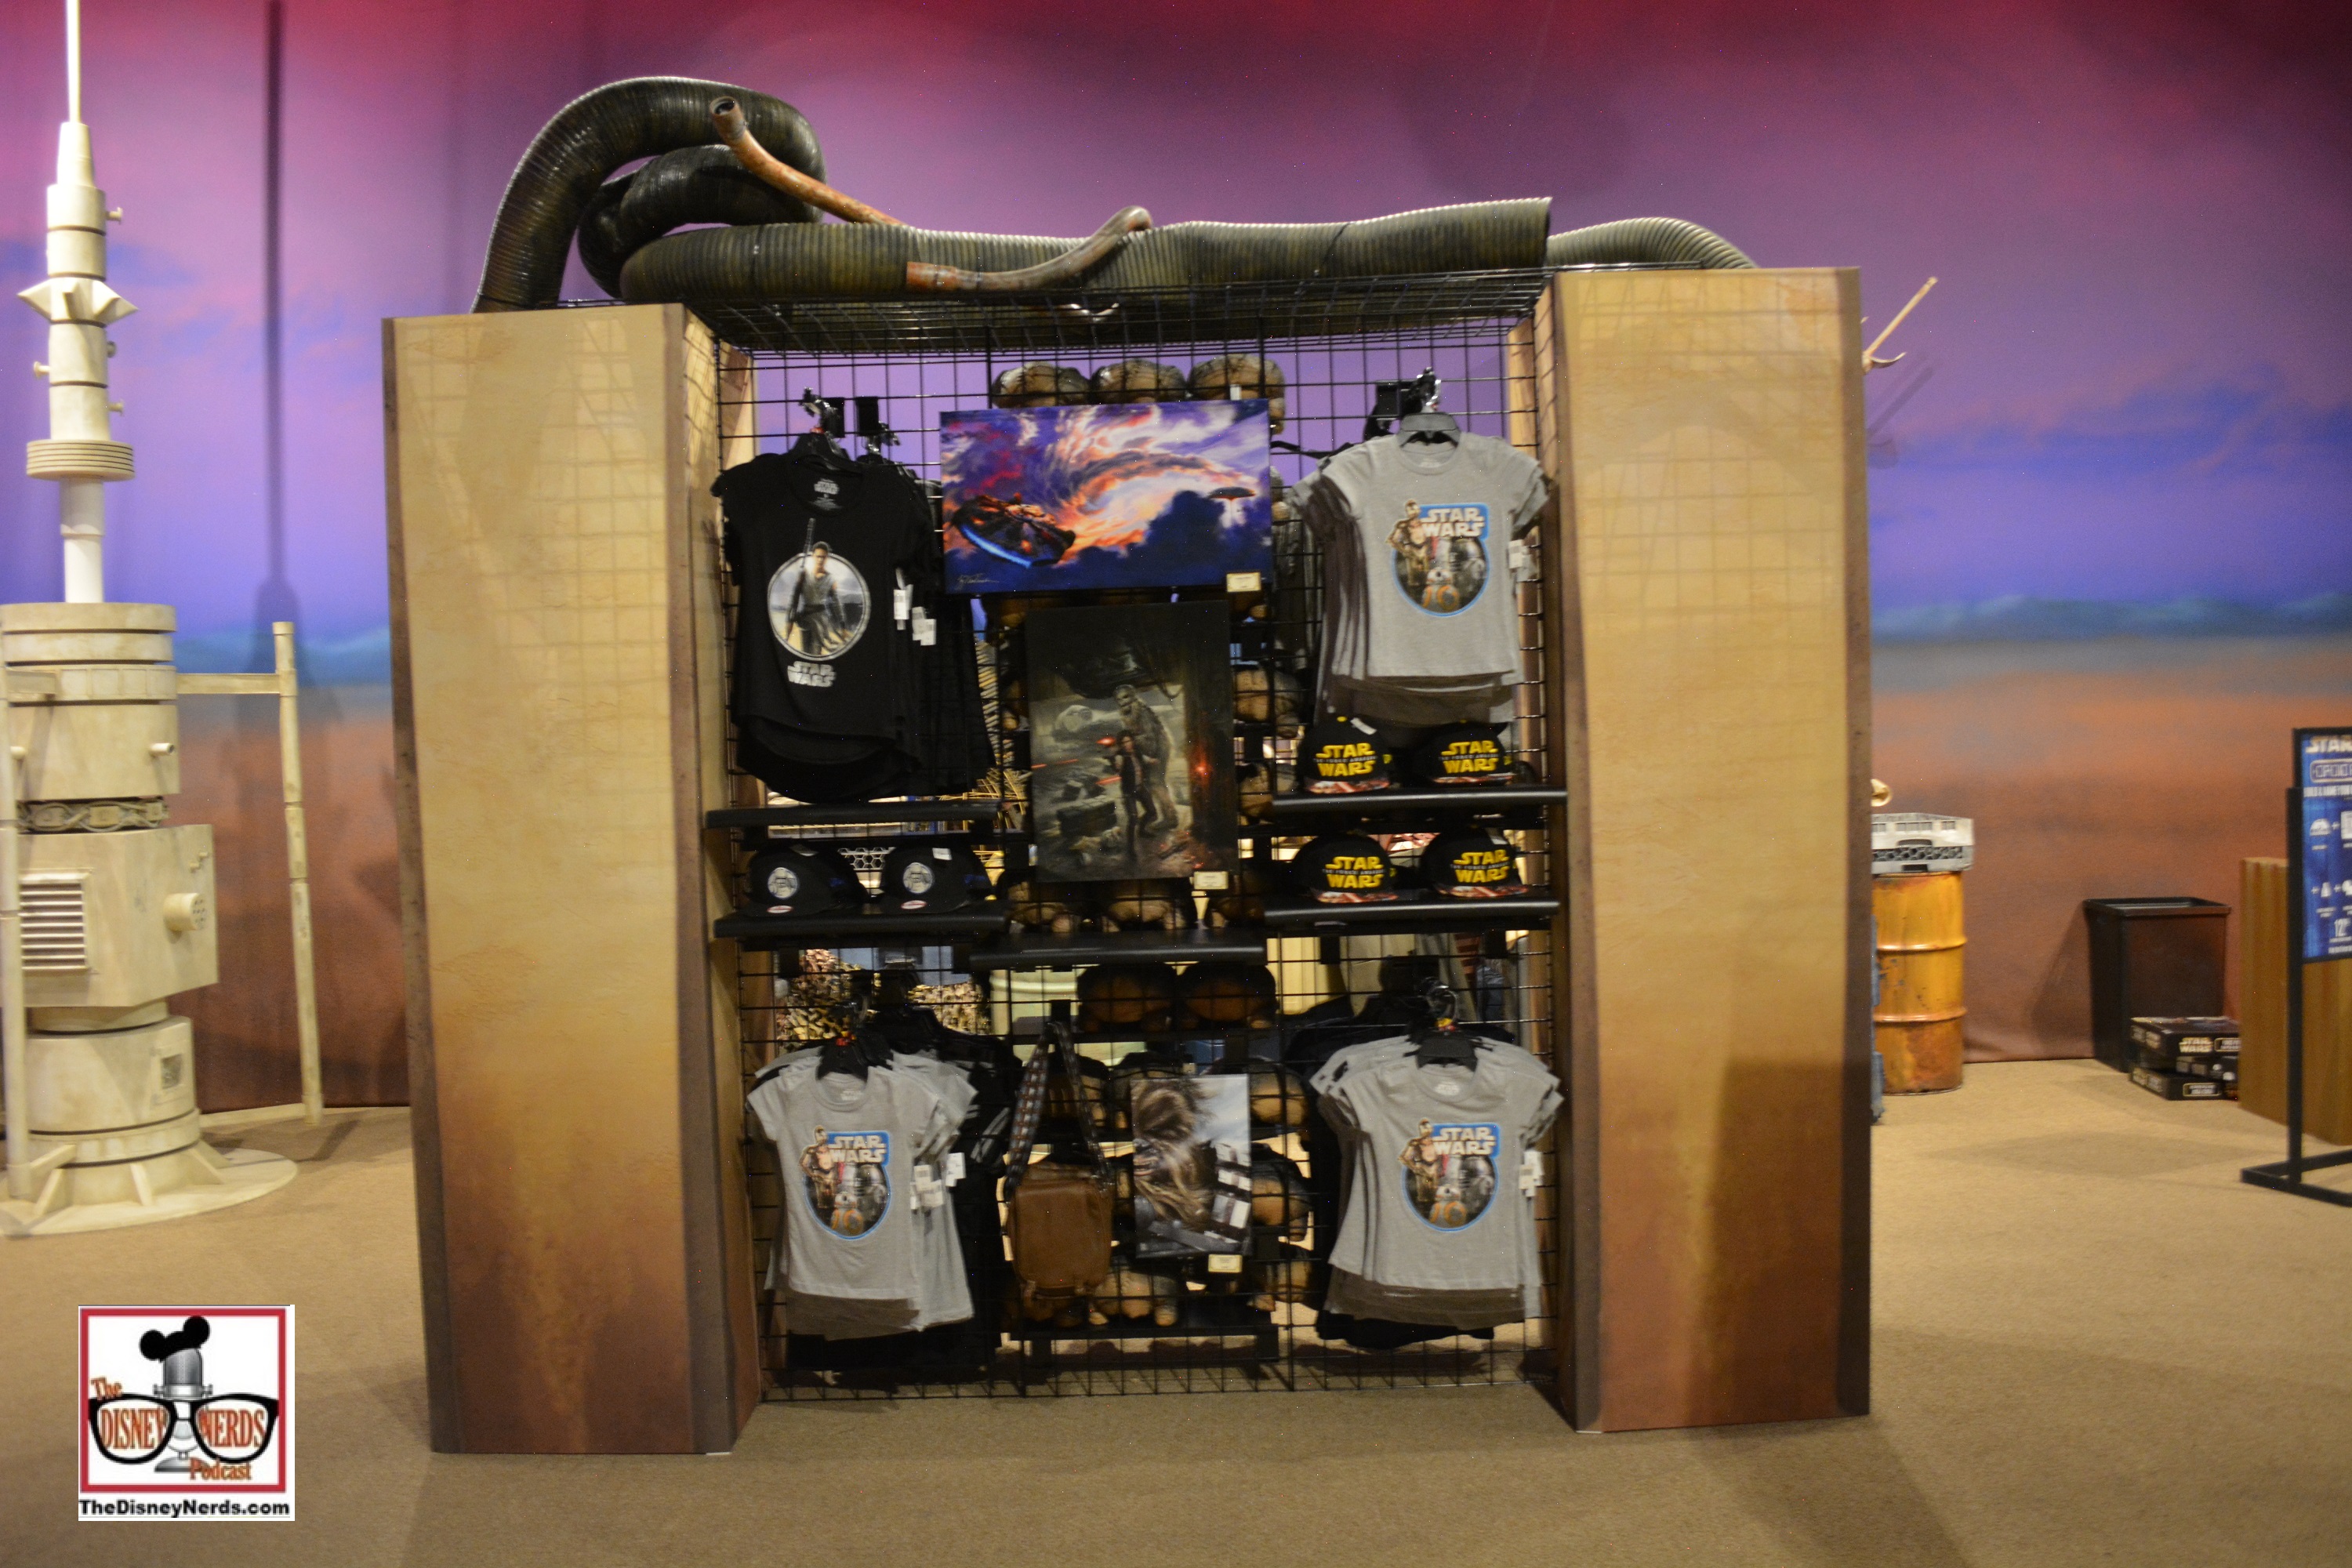 Watto's Grotto reopened, looking exactly like it did for star wars weekend, with all new Episode 7 merchandise.